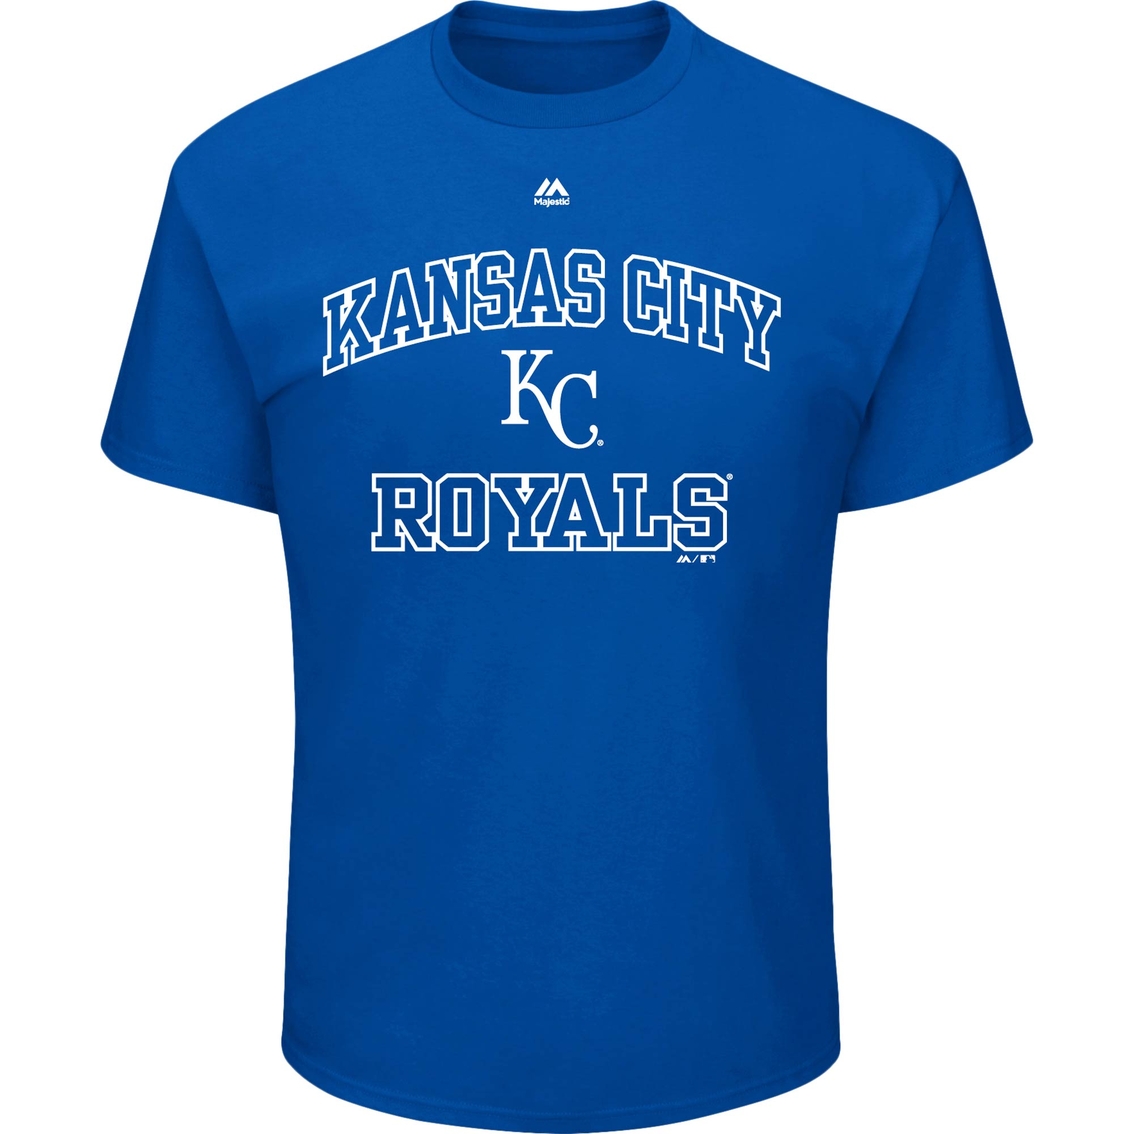 royals shirt with heart